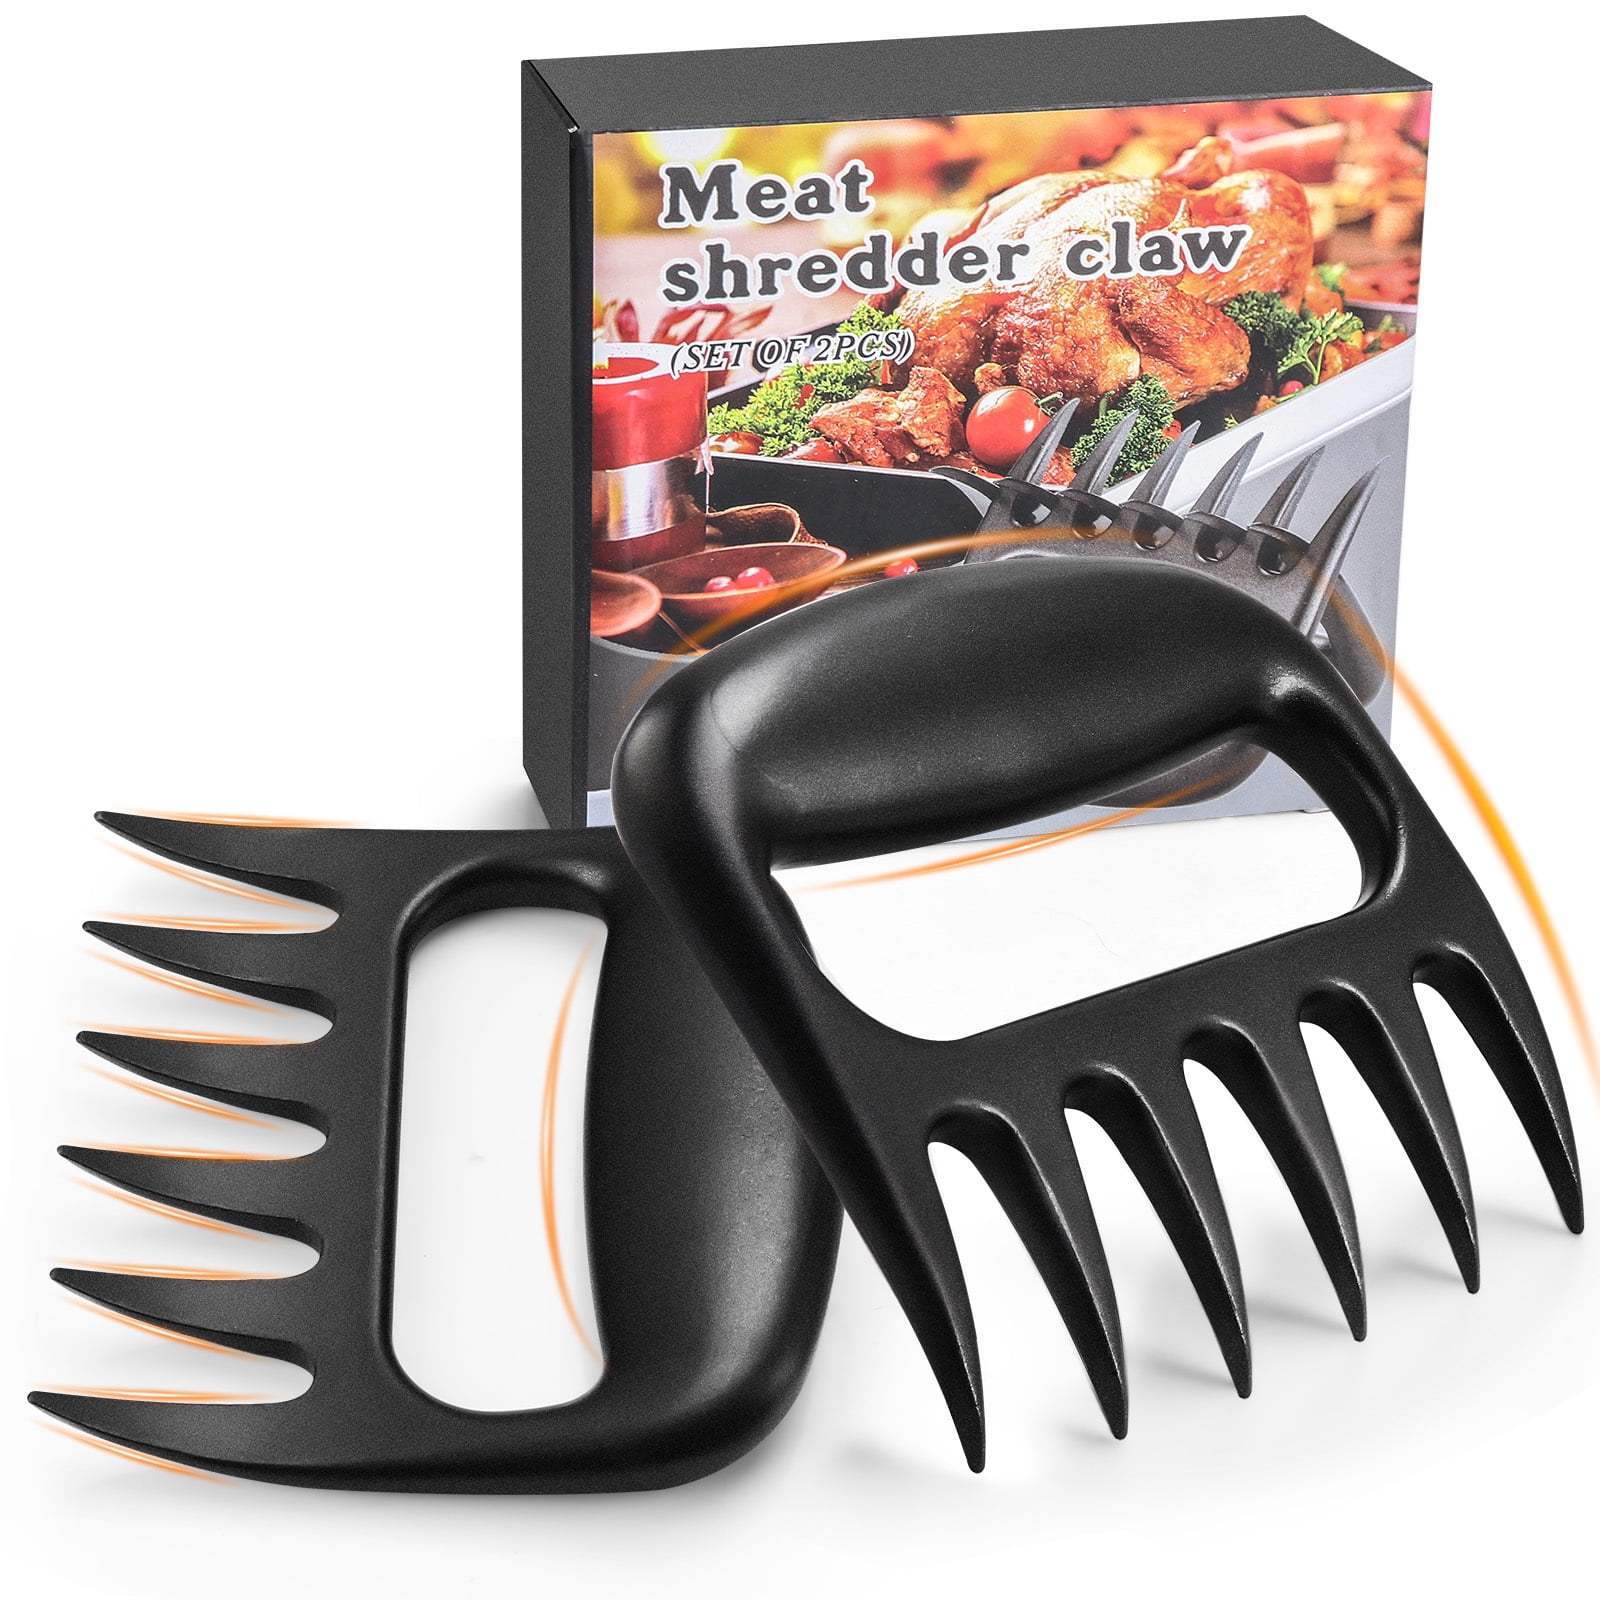 2Pcs Black BBQ Claws Shredding Carving & Handling Foods,Barbecue Grilling Accessories T·X·M Meat Claws for Shredding,Barbecue Claws for Pulled Pork,Grill Smoker Meat Paw Claws 